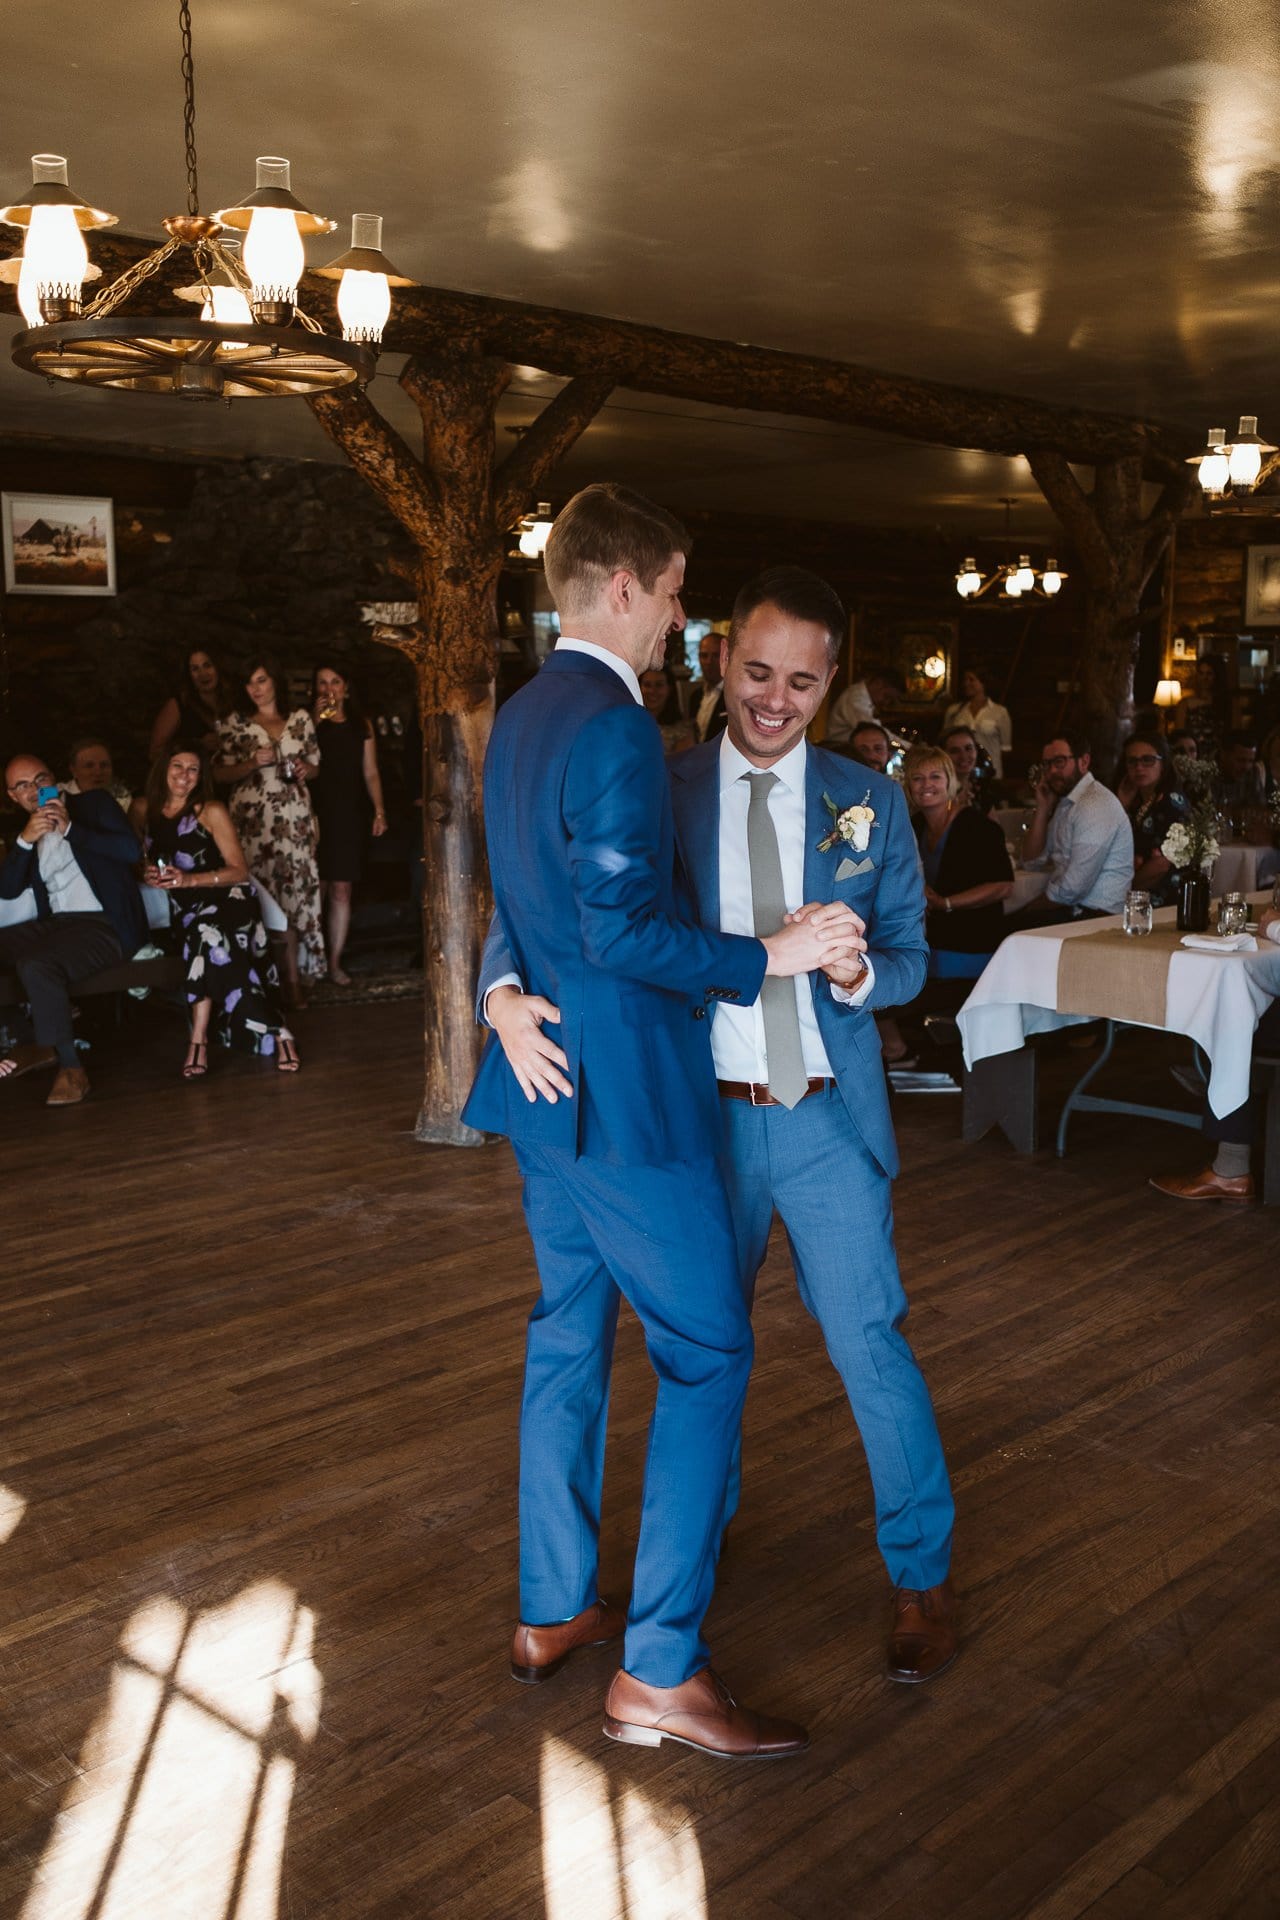 Grooms share first dance at Colorado Mountain Ranch wedding in Boulder